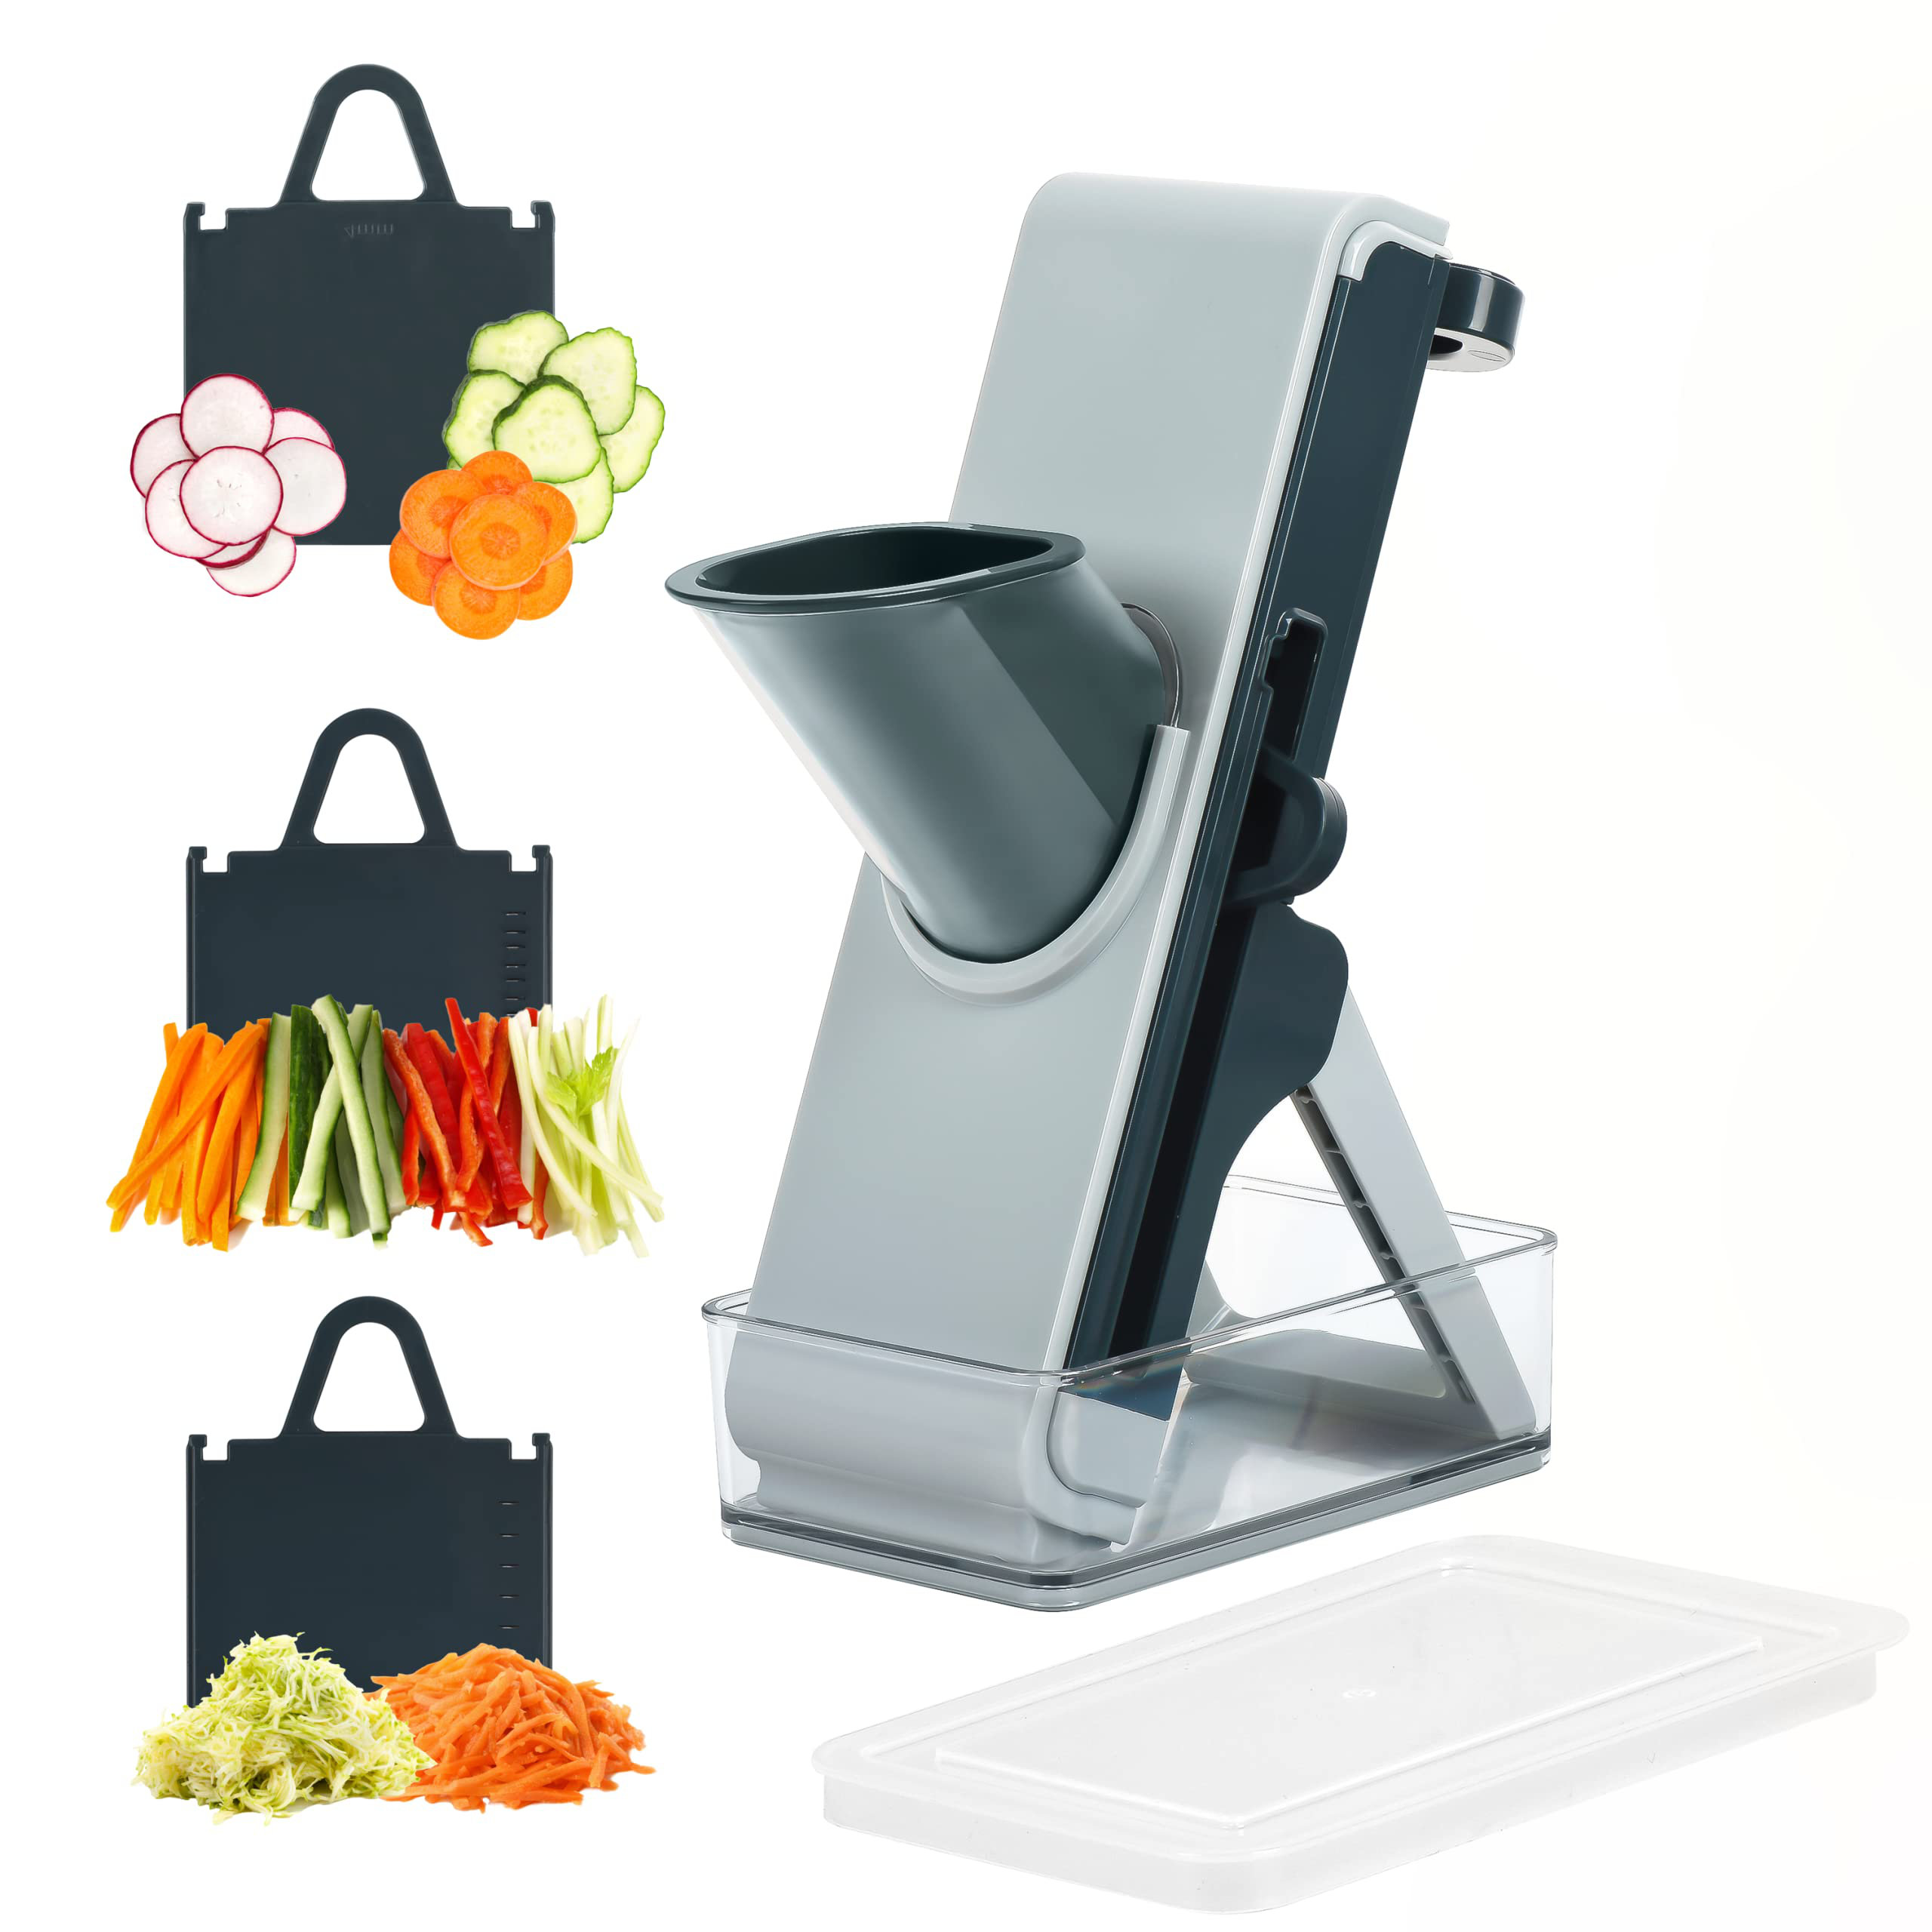 Homarden Mandoline Slicer - All-In-1 Vegetable Slicer, Mincer, Chopper,  Dicer - Fruit Cutter, Non-Slip, Multi Blade With Container Perfect For Meal